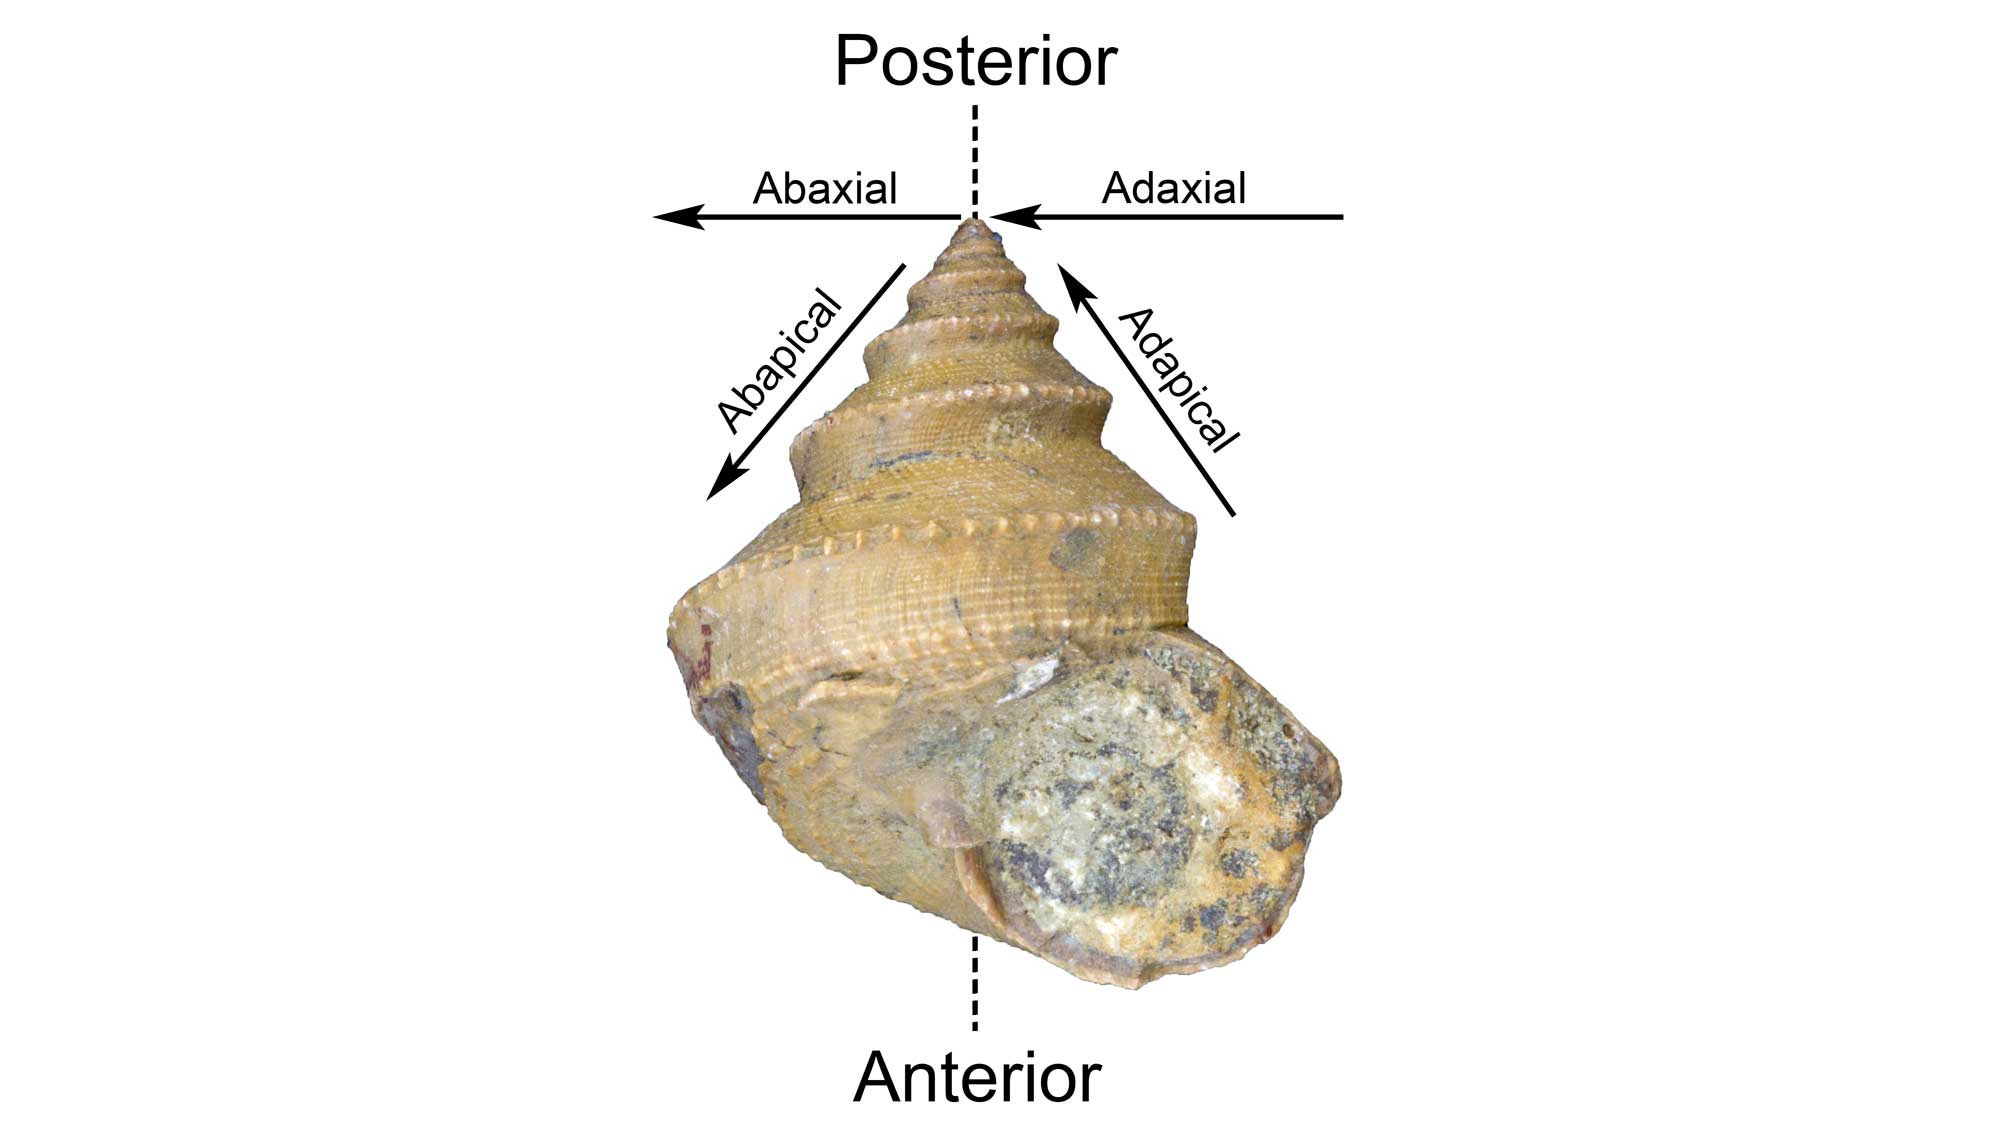 Image showing positional terms on a Paleozoic snail fossil.